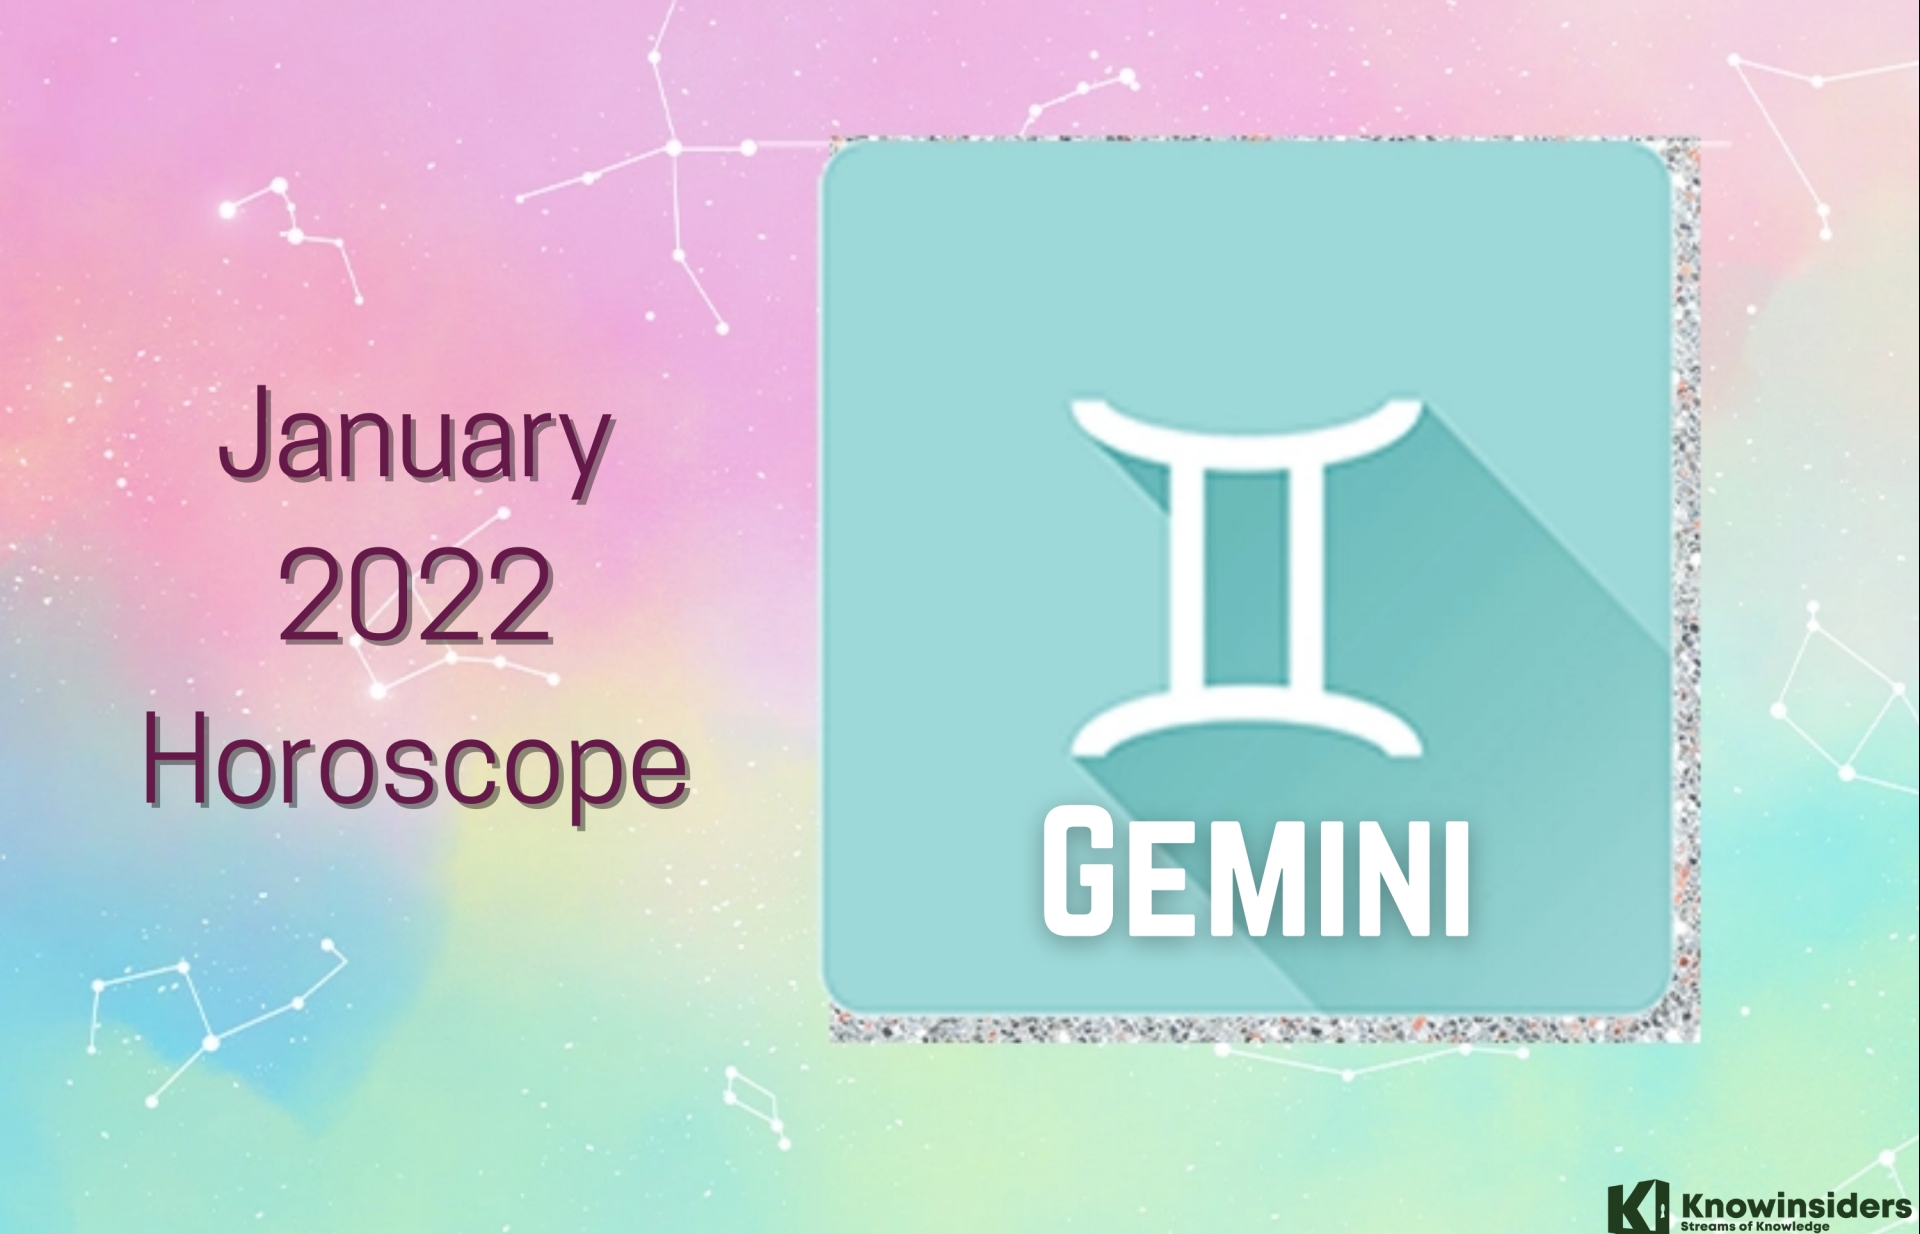 GEMINI January 2022 Horoscope: Monthly Prediction for Love, Career, Money and Health